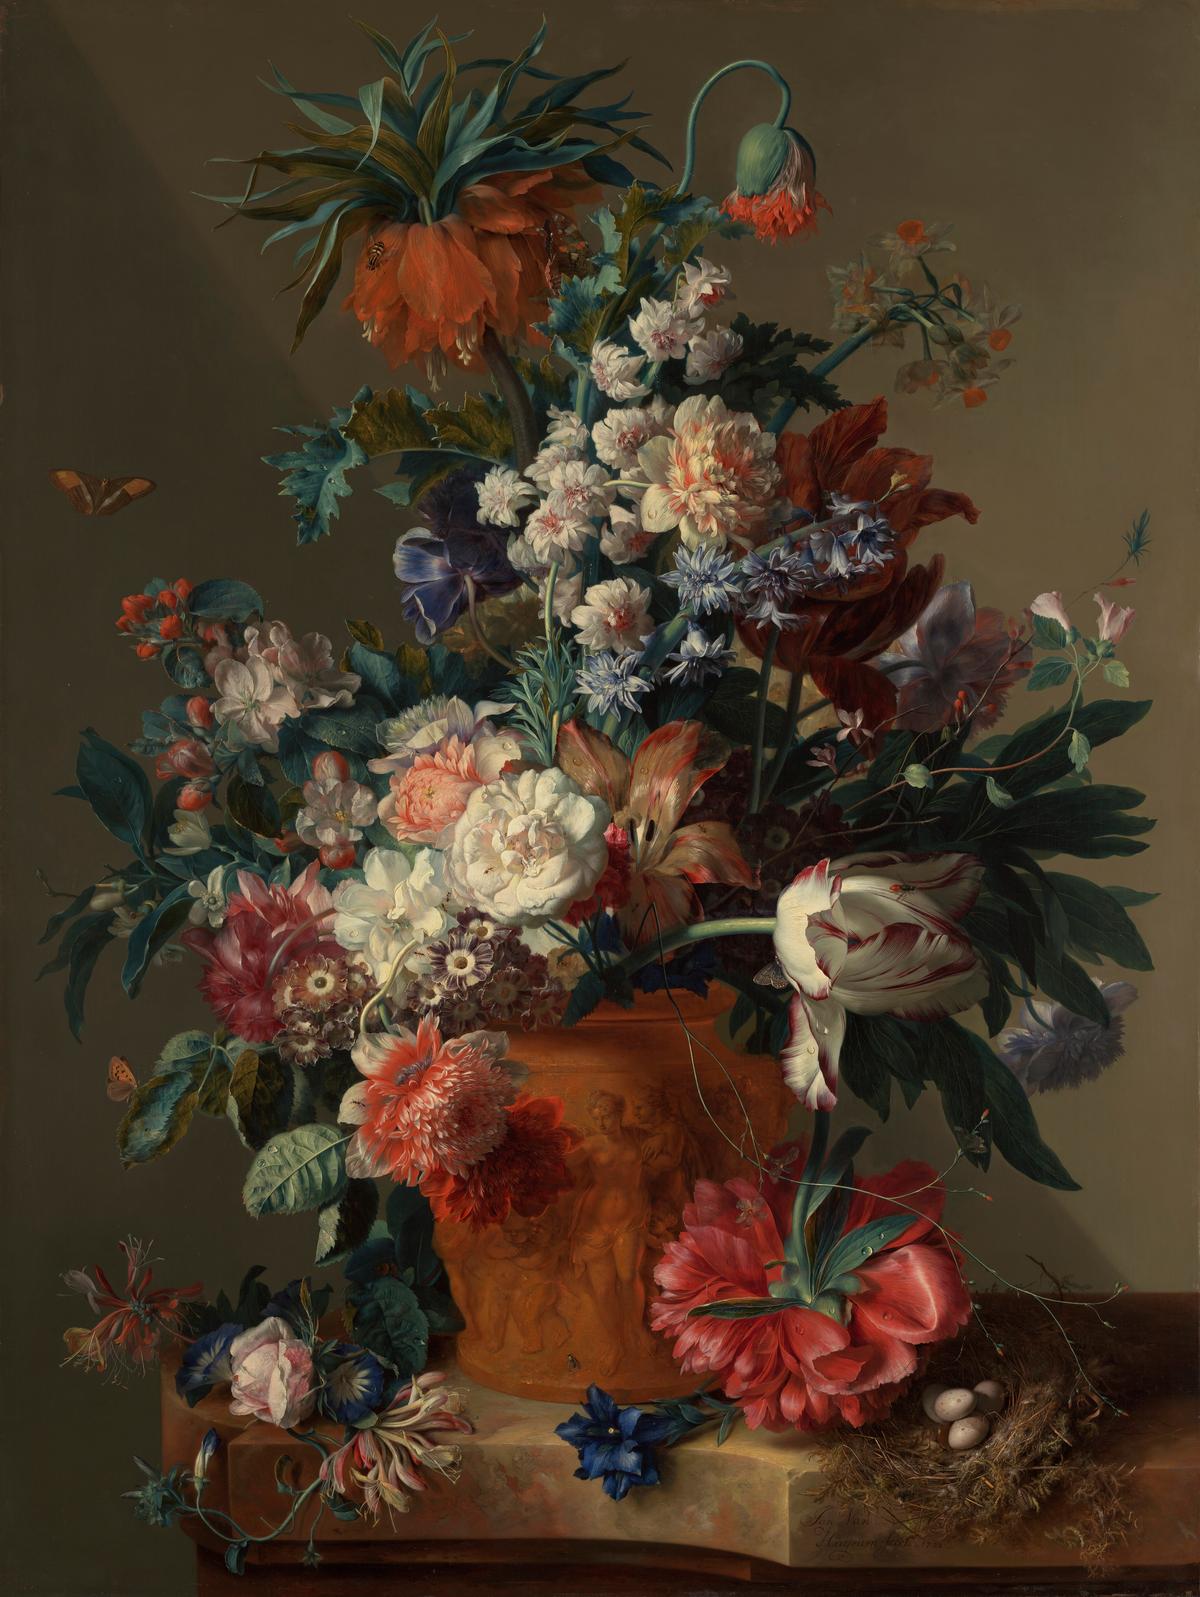 "Vase of Flowers," 1722, by Jan van Huysum. Oil on panel; 31.6 inches by 24 inches. J. Paul Getty Museum, Los Angeles. (Public Domain)